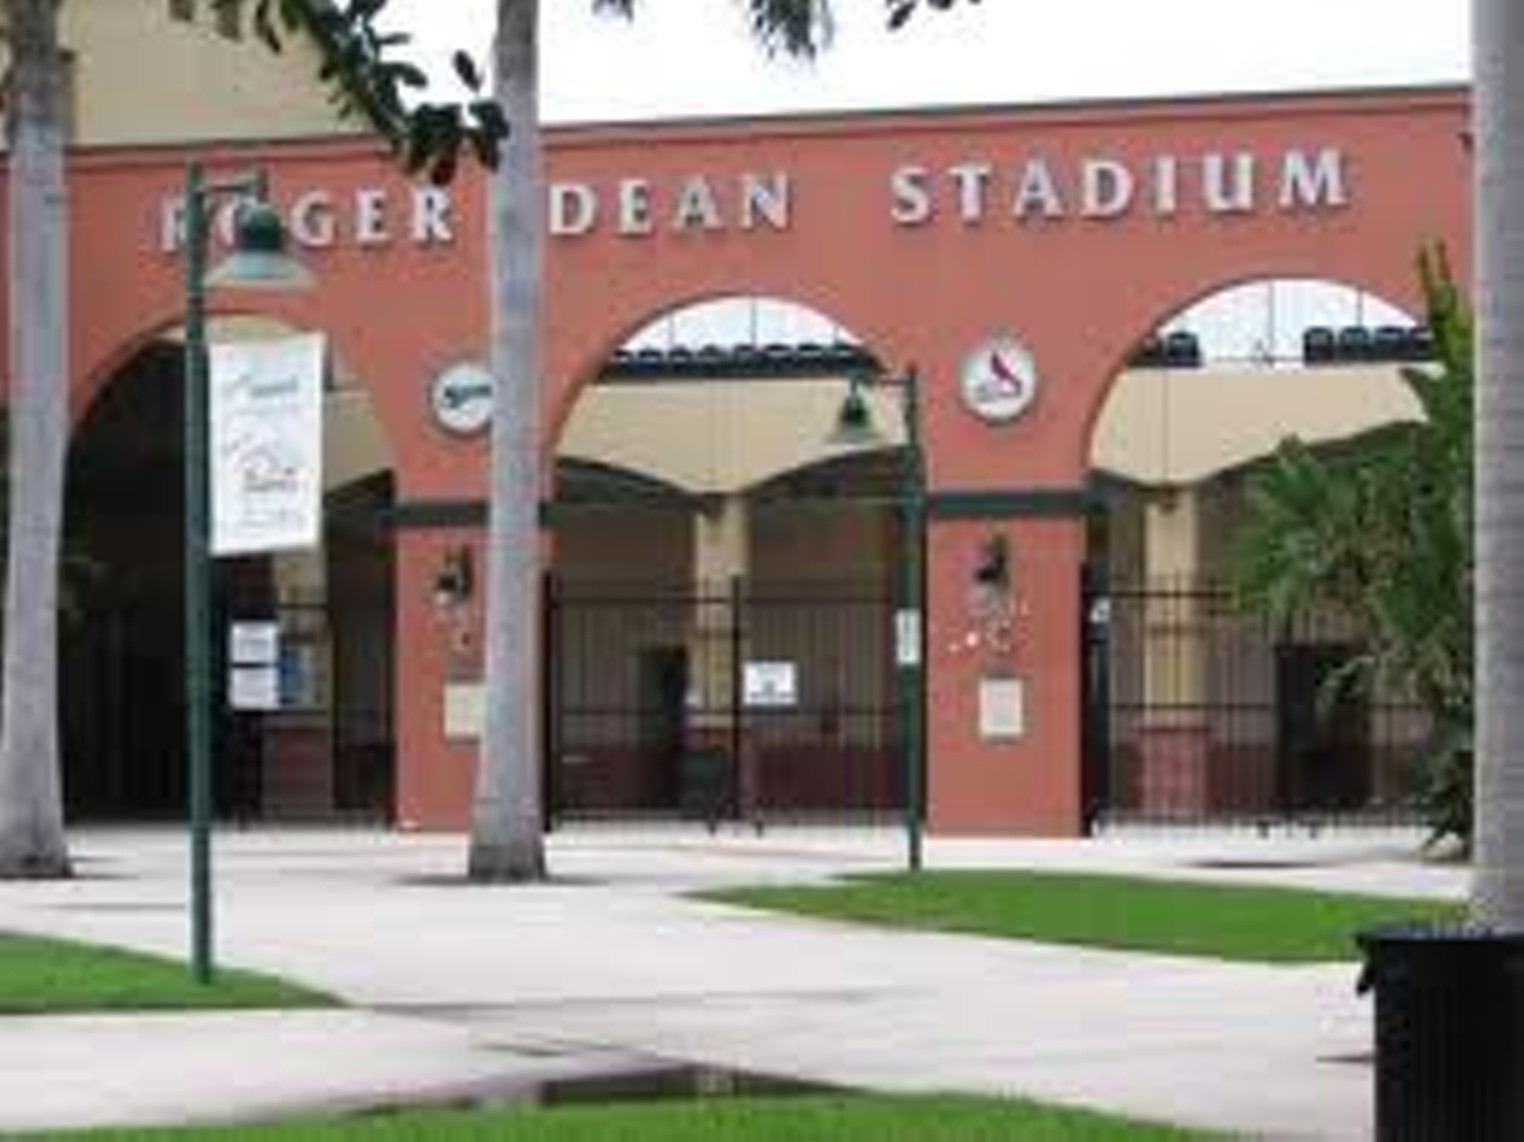 Best Sports Venue 2004 Roger Dean Stadium Sports and Recreation South Florida